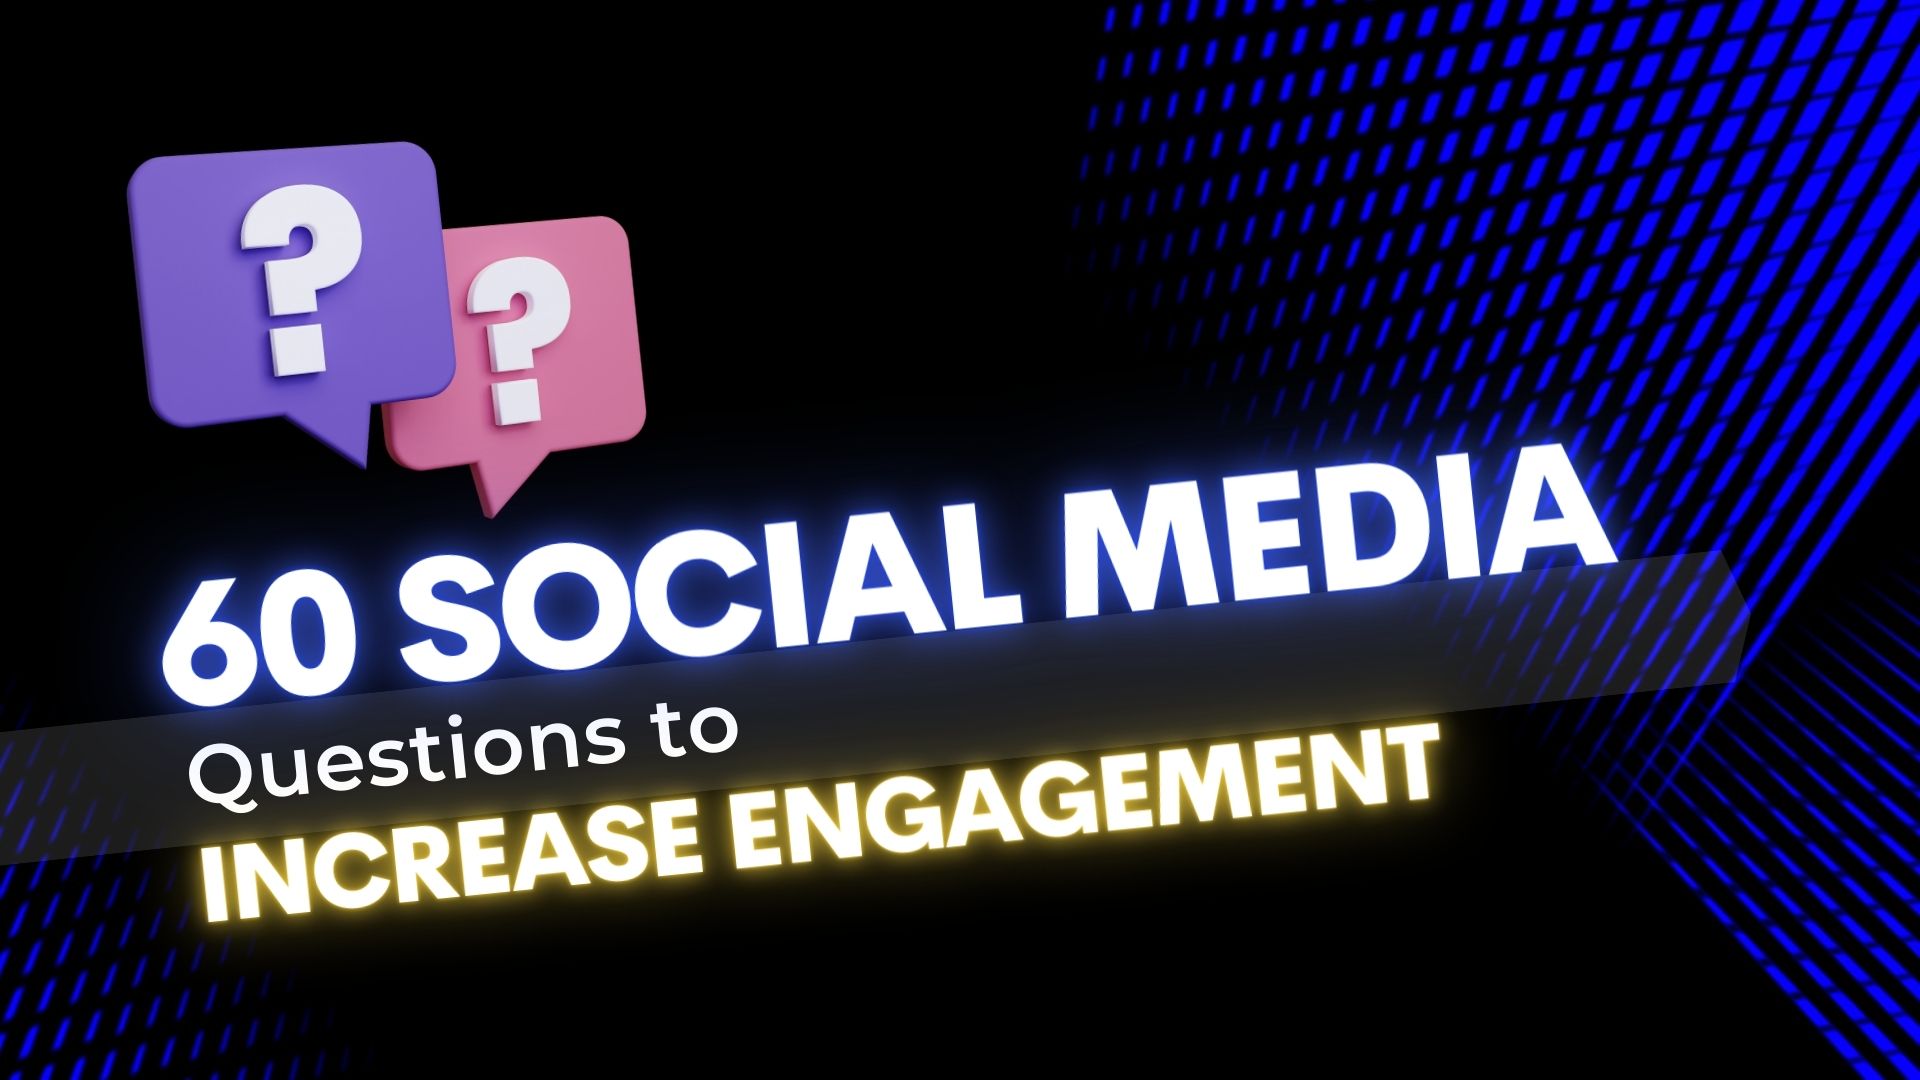 60 Social Media Questions to Increase Engagement